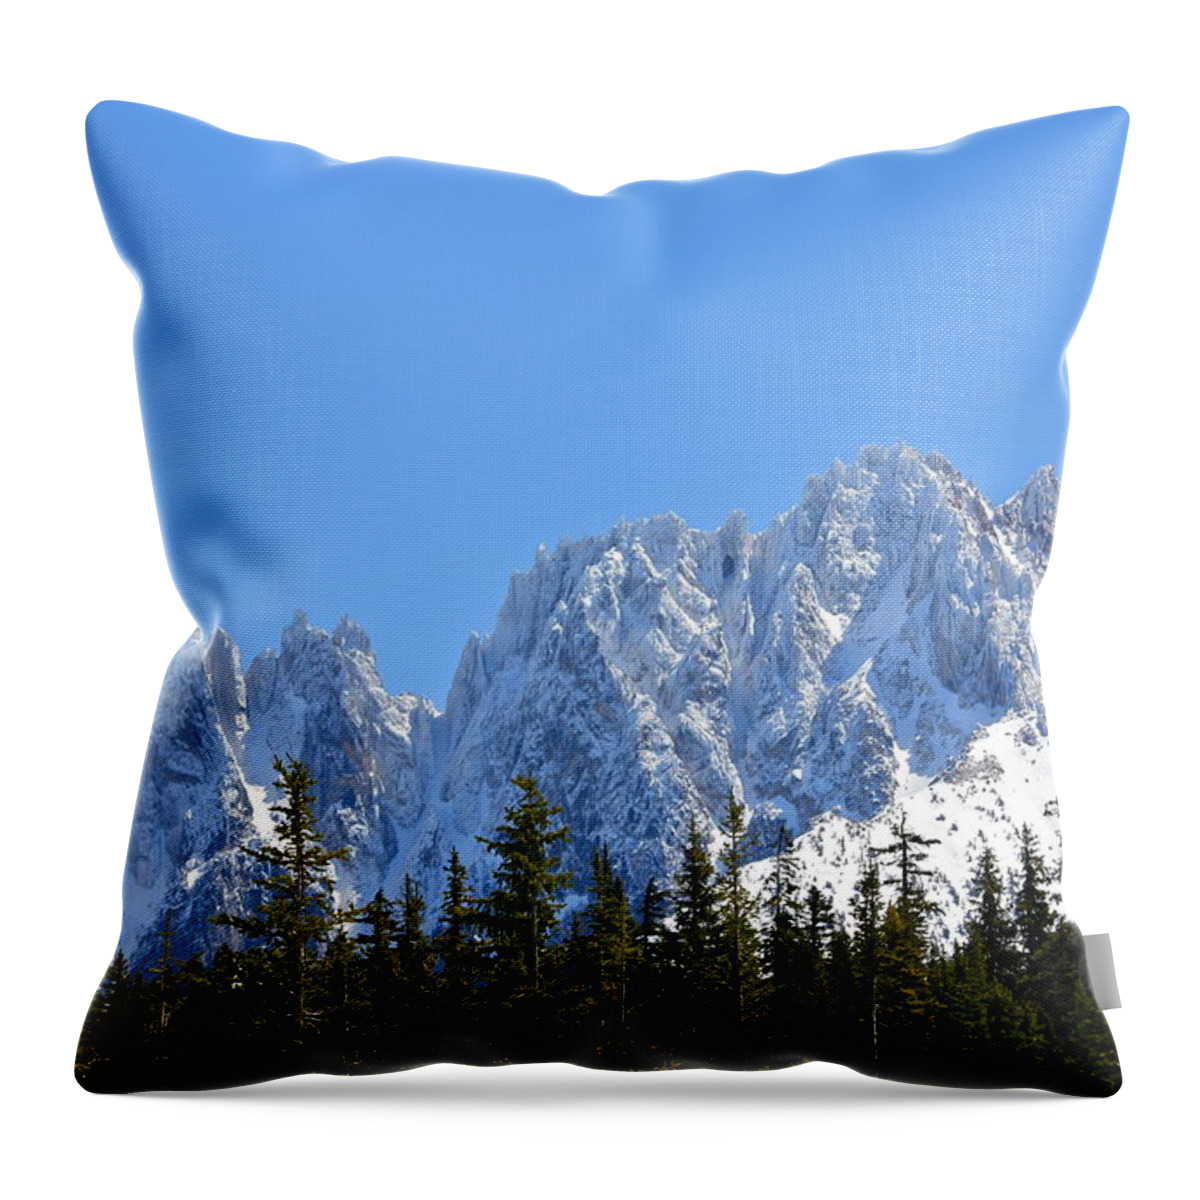 Mountains Throw Pillow featuring the photograph Mountain Majesty by Diana Hatcher